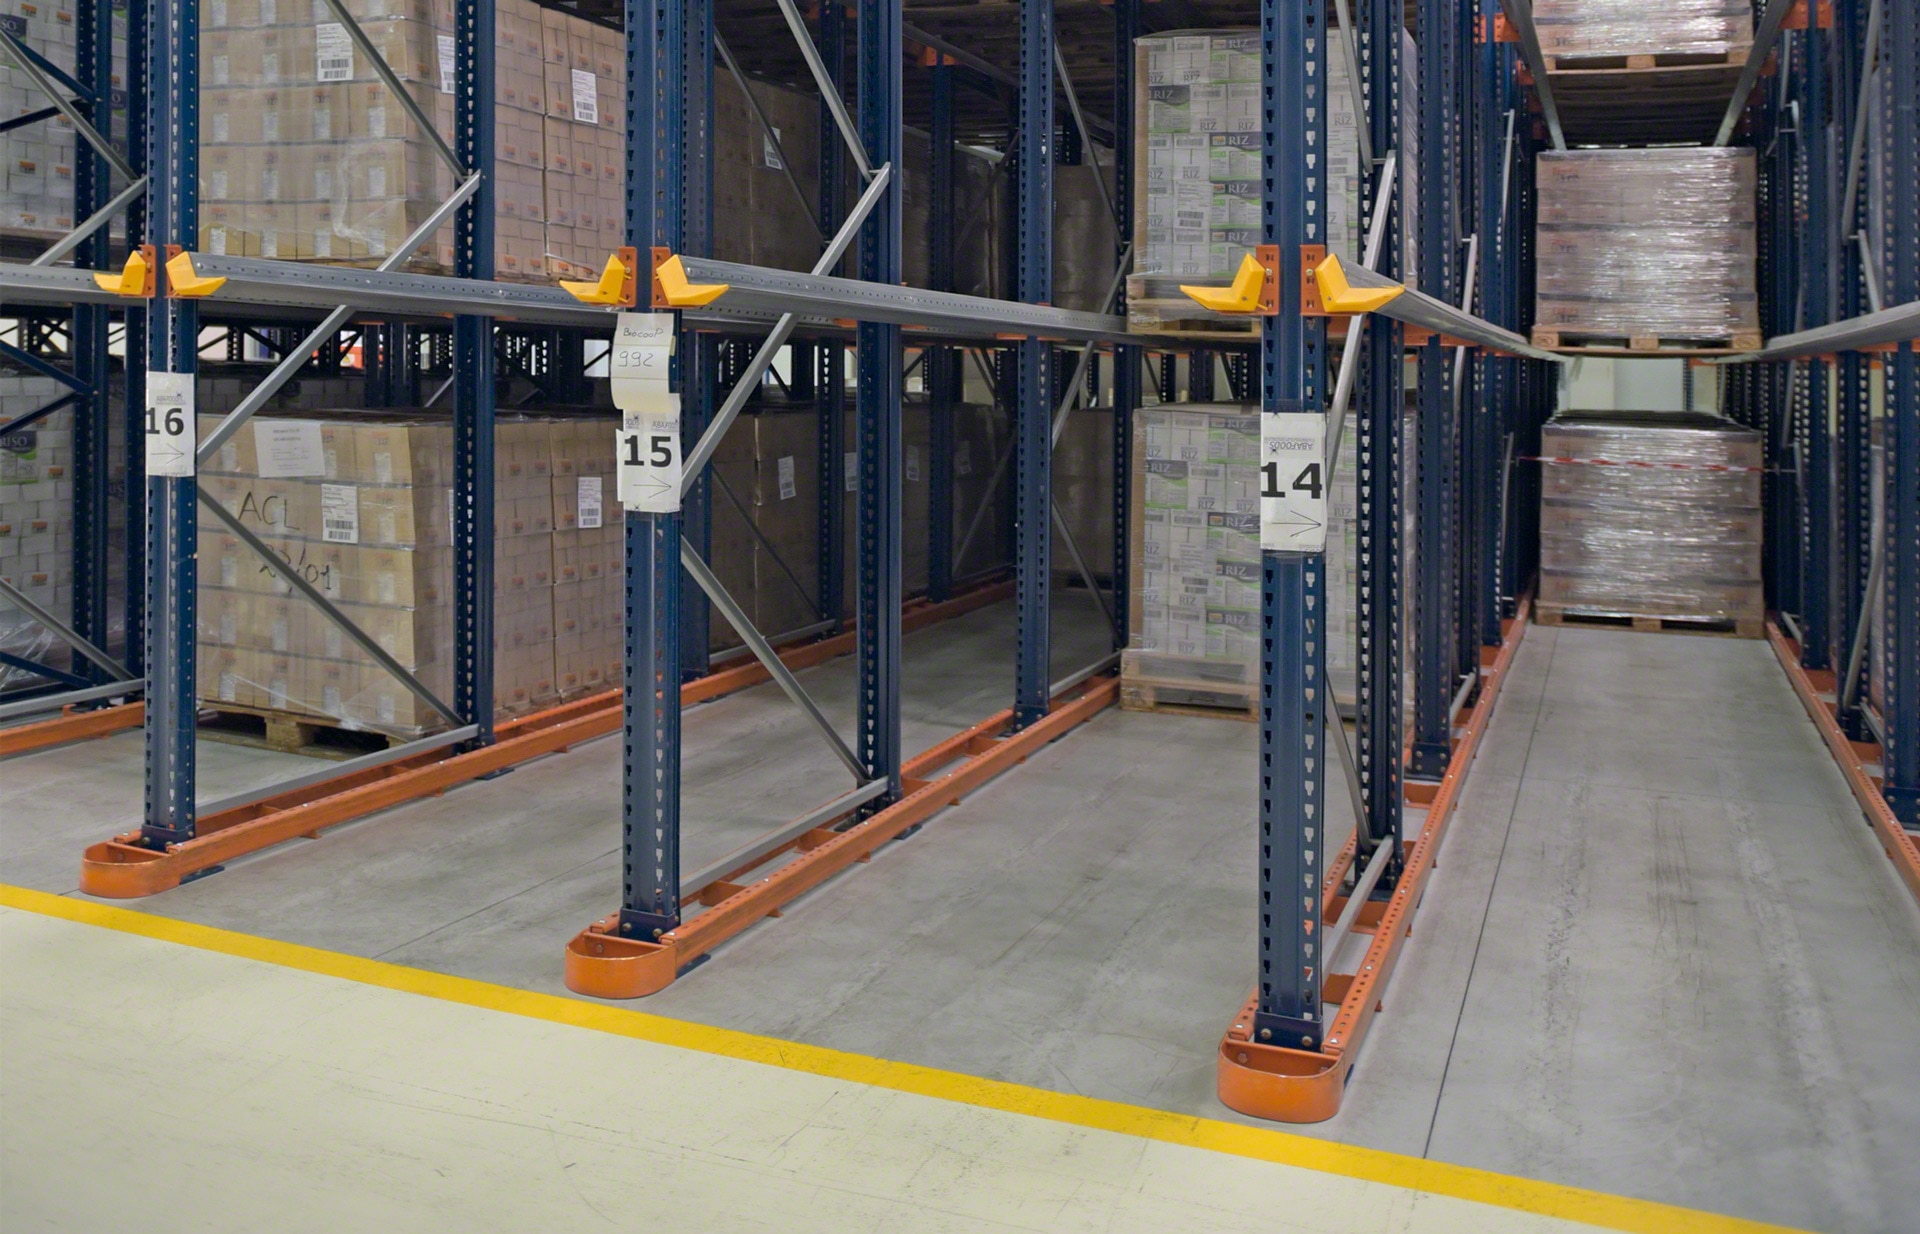 The VGPC guide rail is very common in warehouses where forklifts operate in drive-in racks